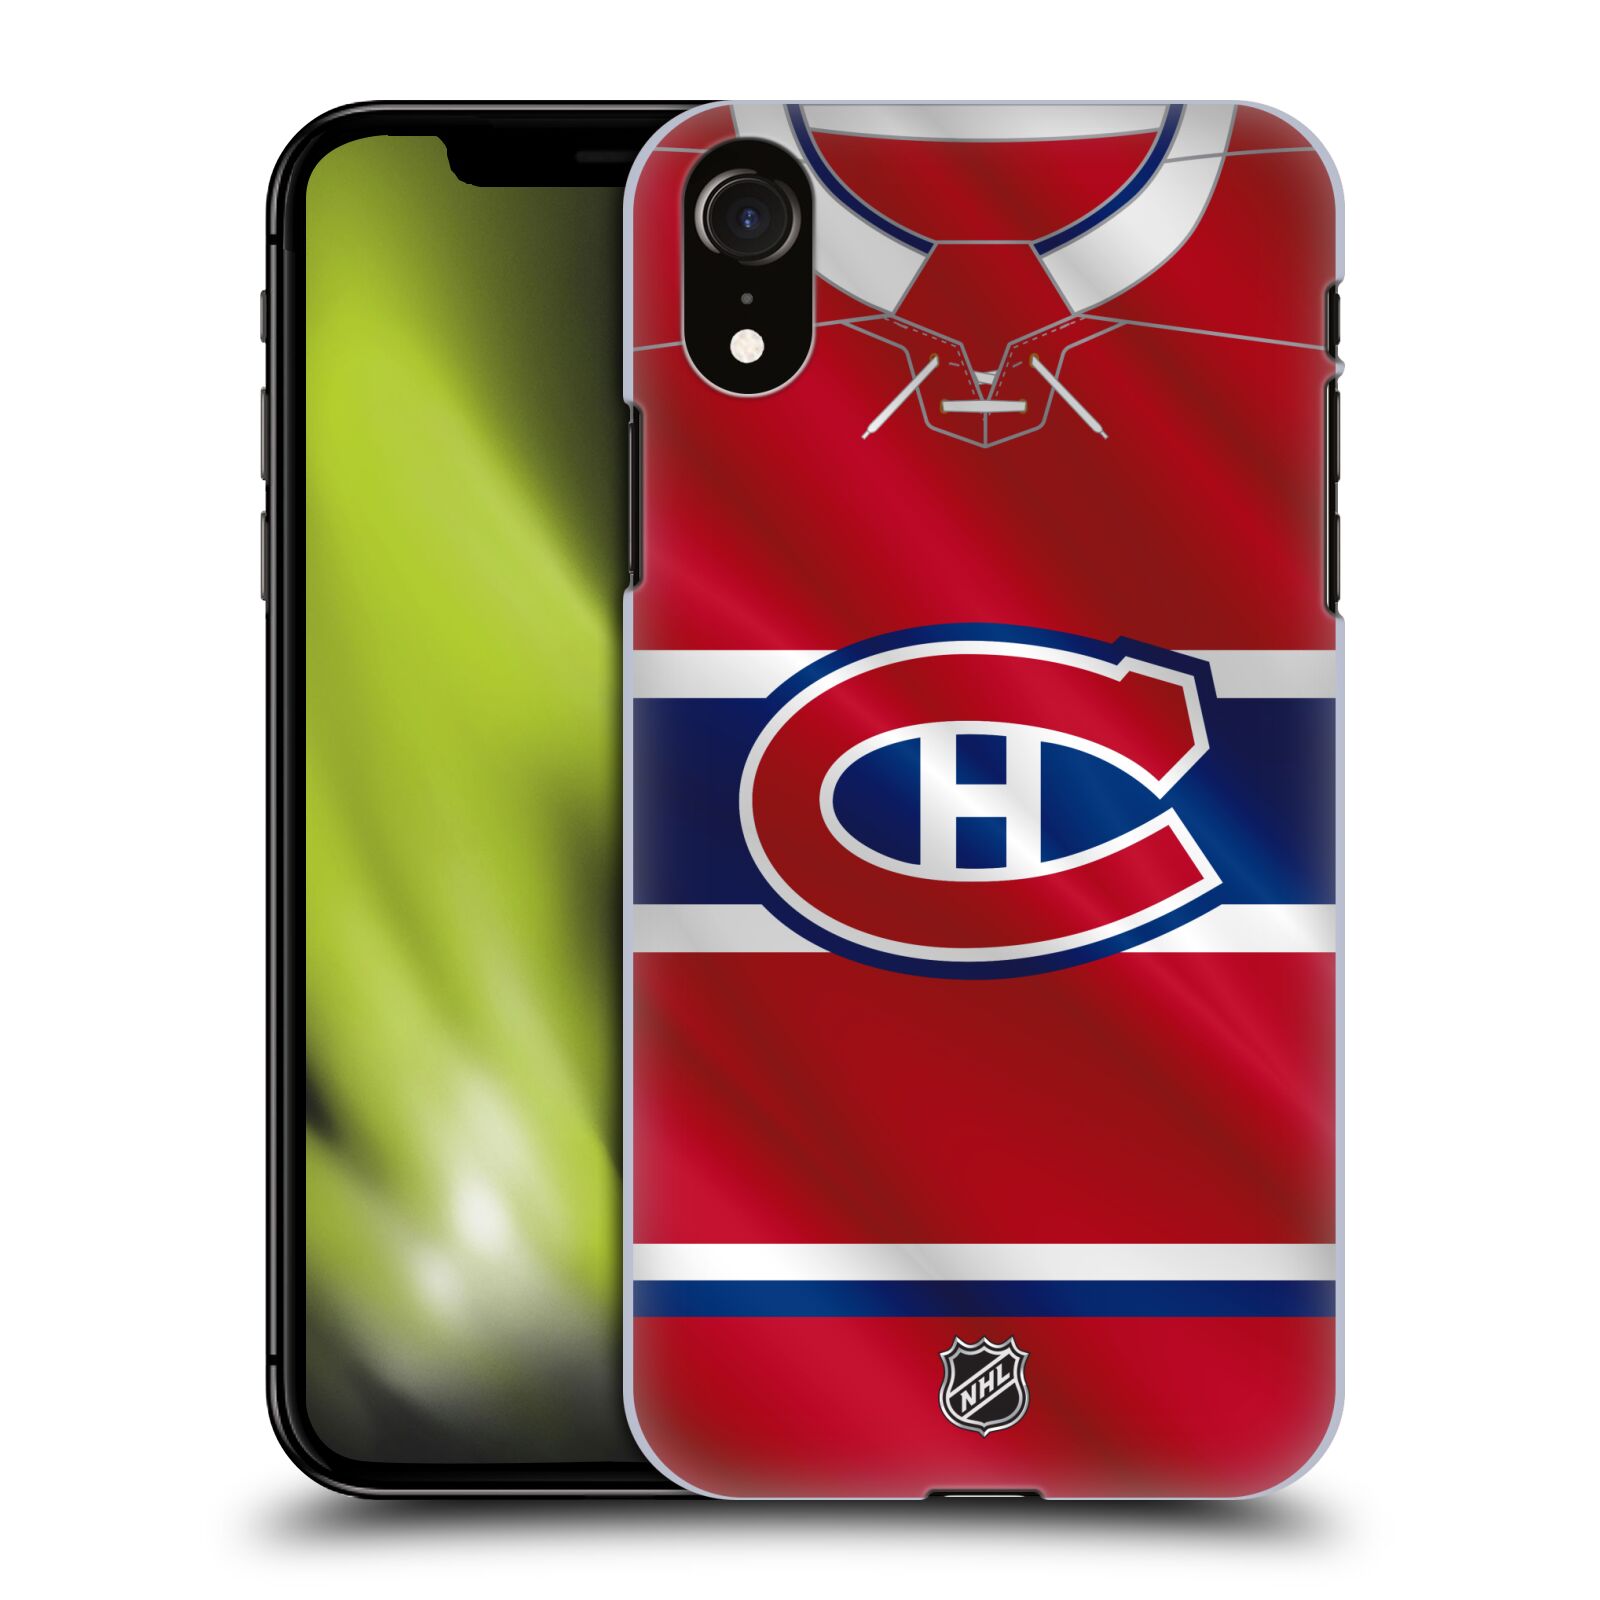 Pouzdro na mobil Apple Iphone XR - HEAD CASE - Hokej NHL - Montreal Canadiens - Dres